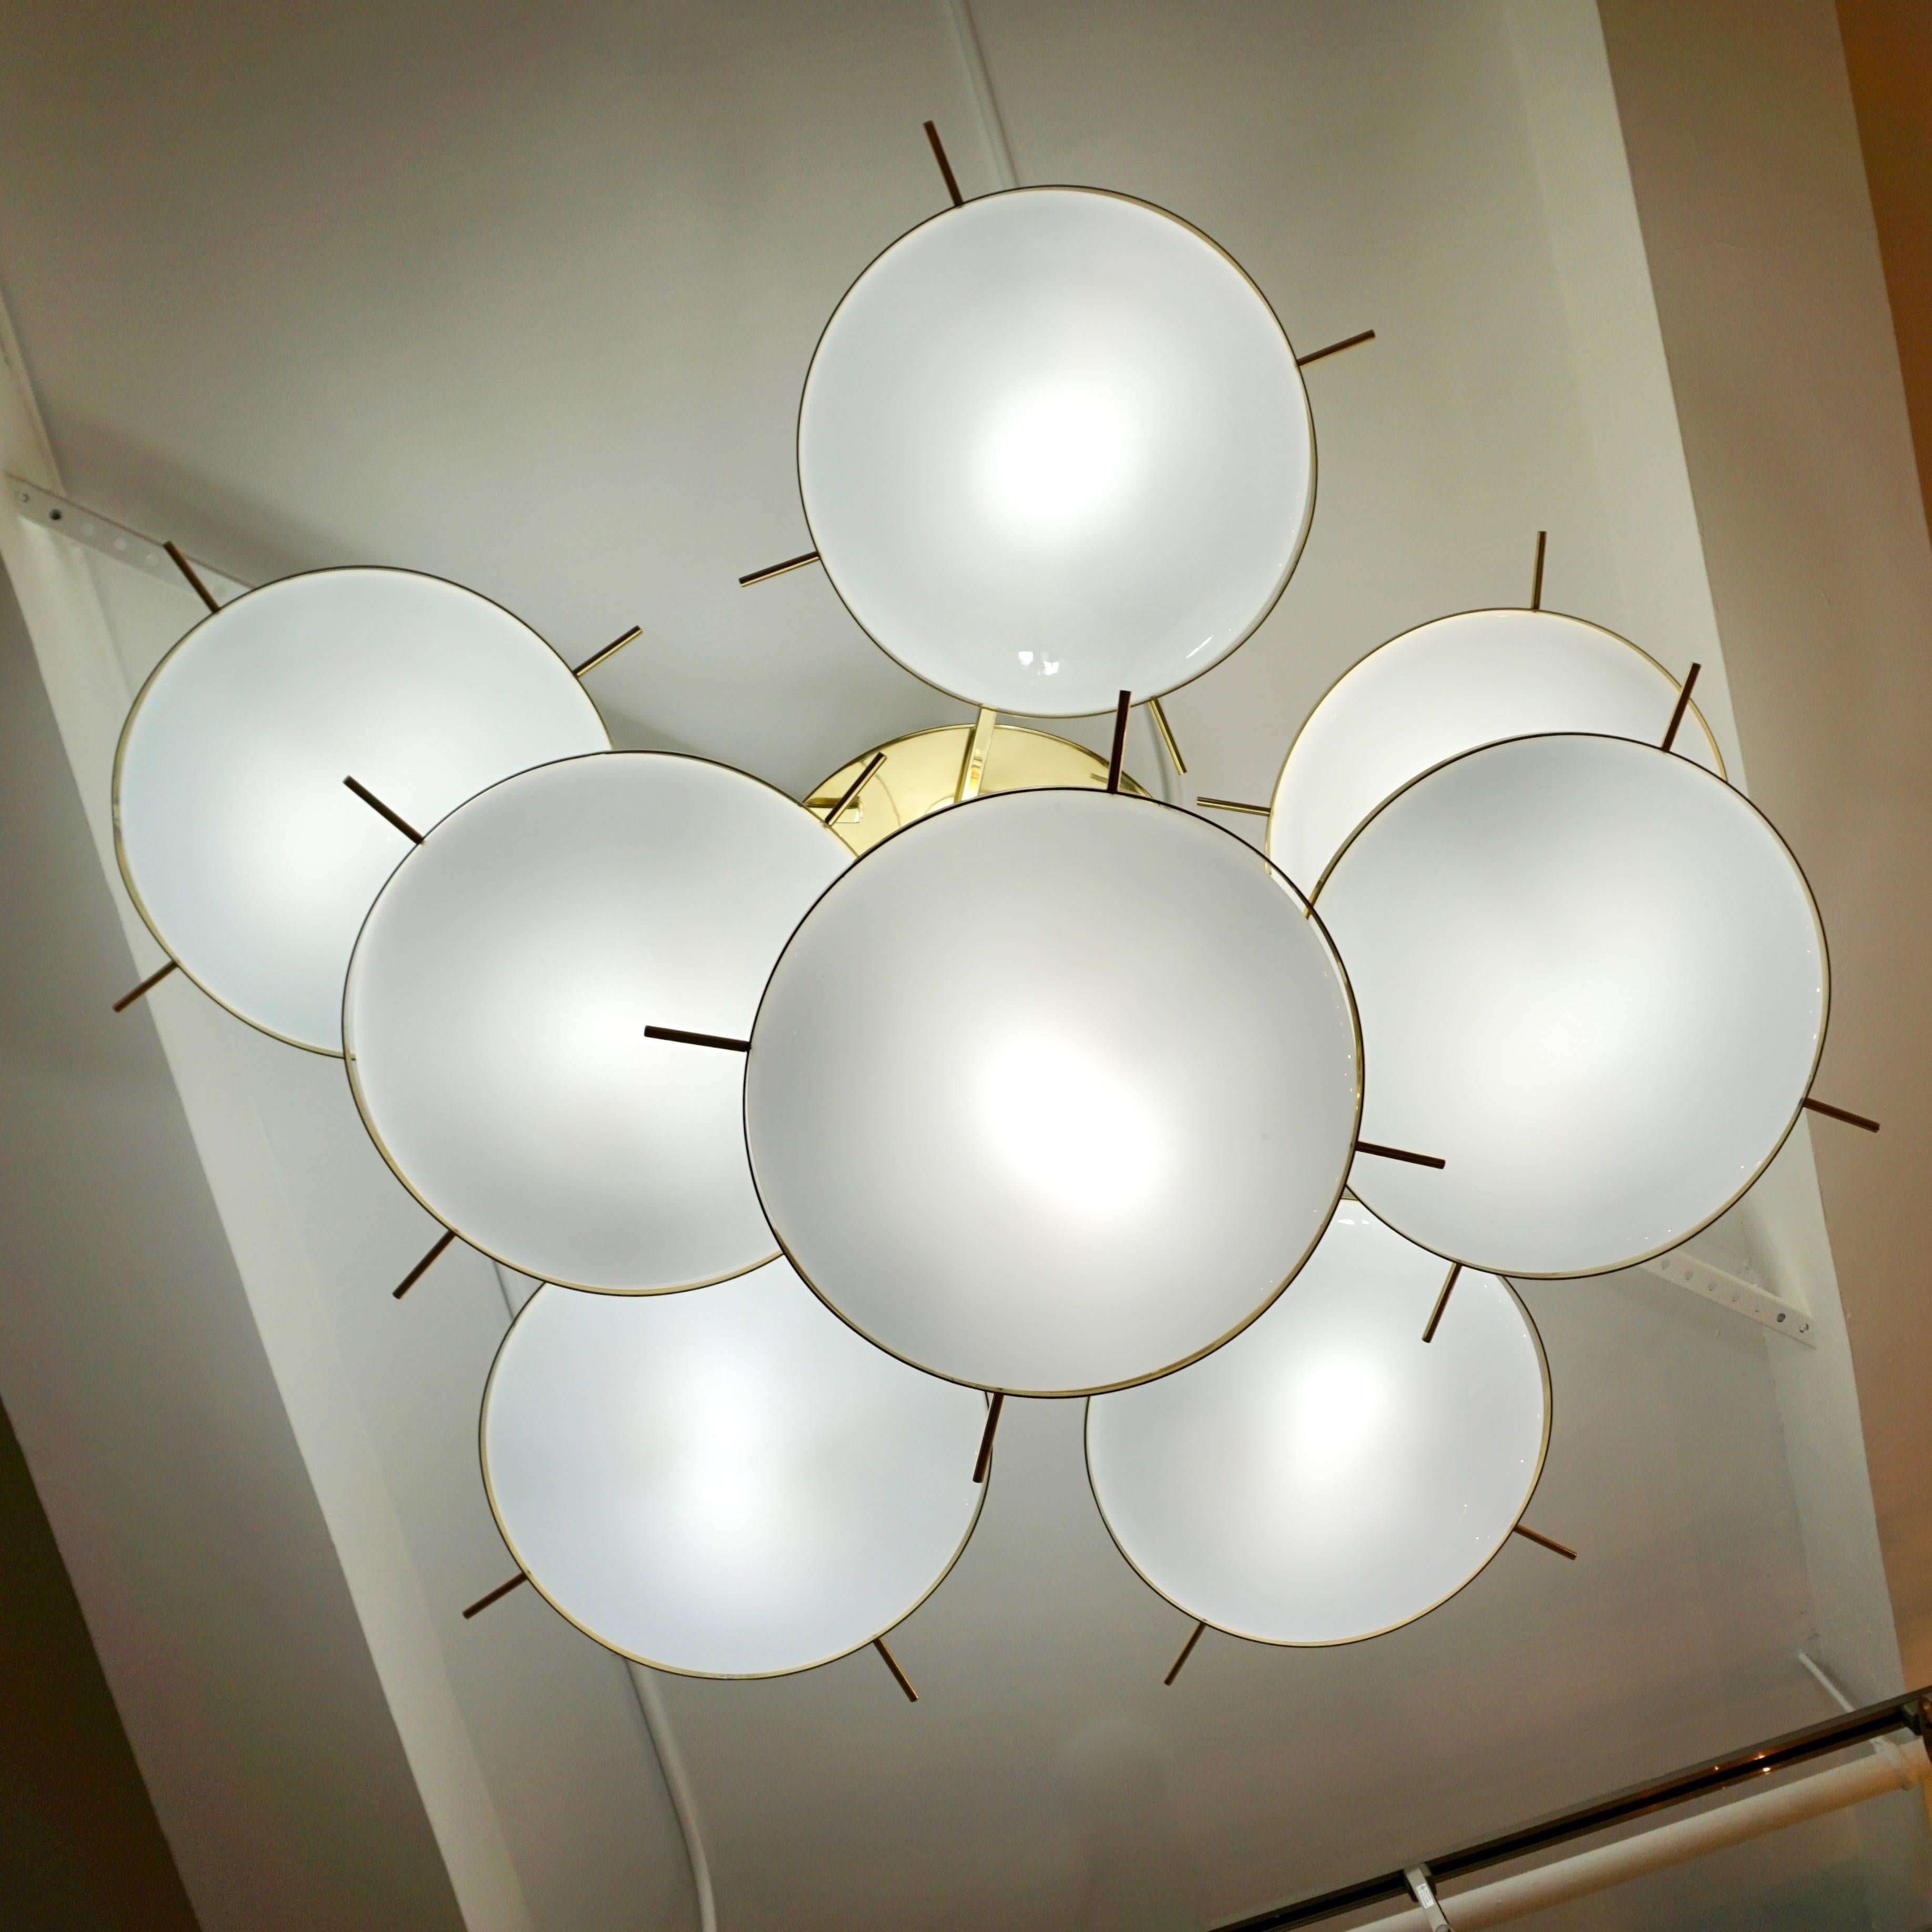 Italian fine design bespoke chandelier, entirely handmade, modern organic design, with eight round saucer-shaped shades in blown opaline white Murano glass to maximize the light, suspended on different levels like revolving planets from a